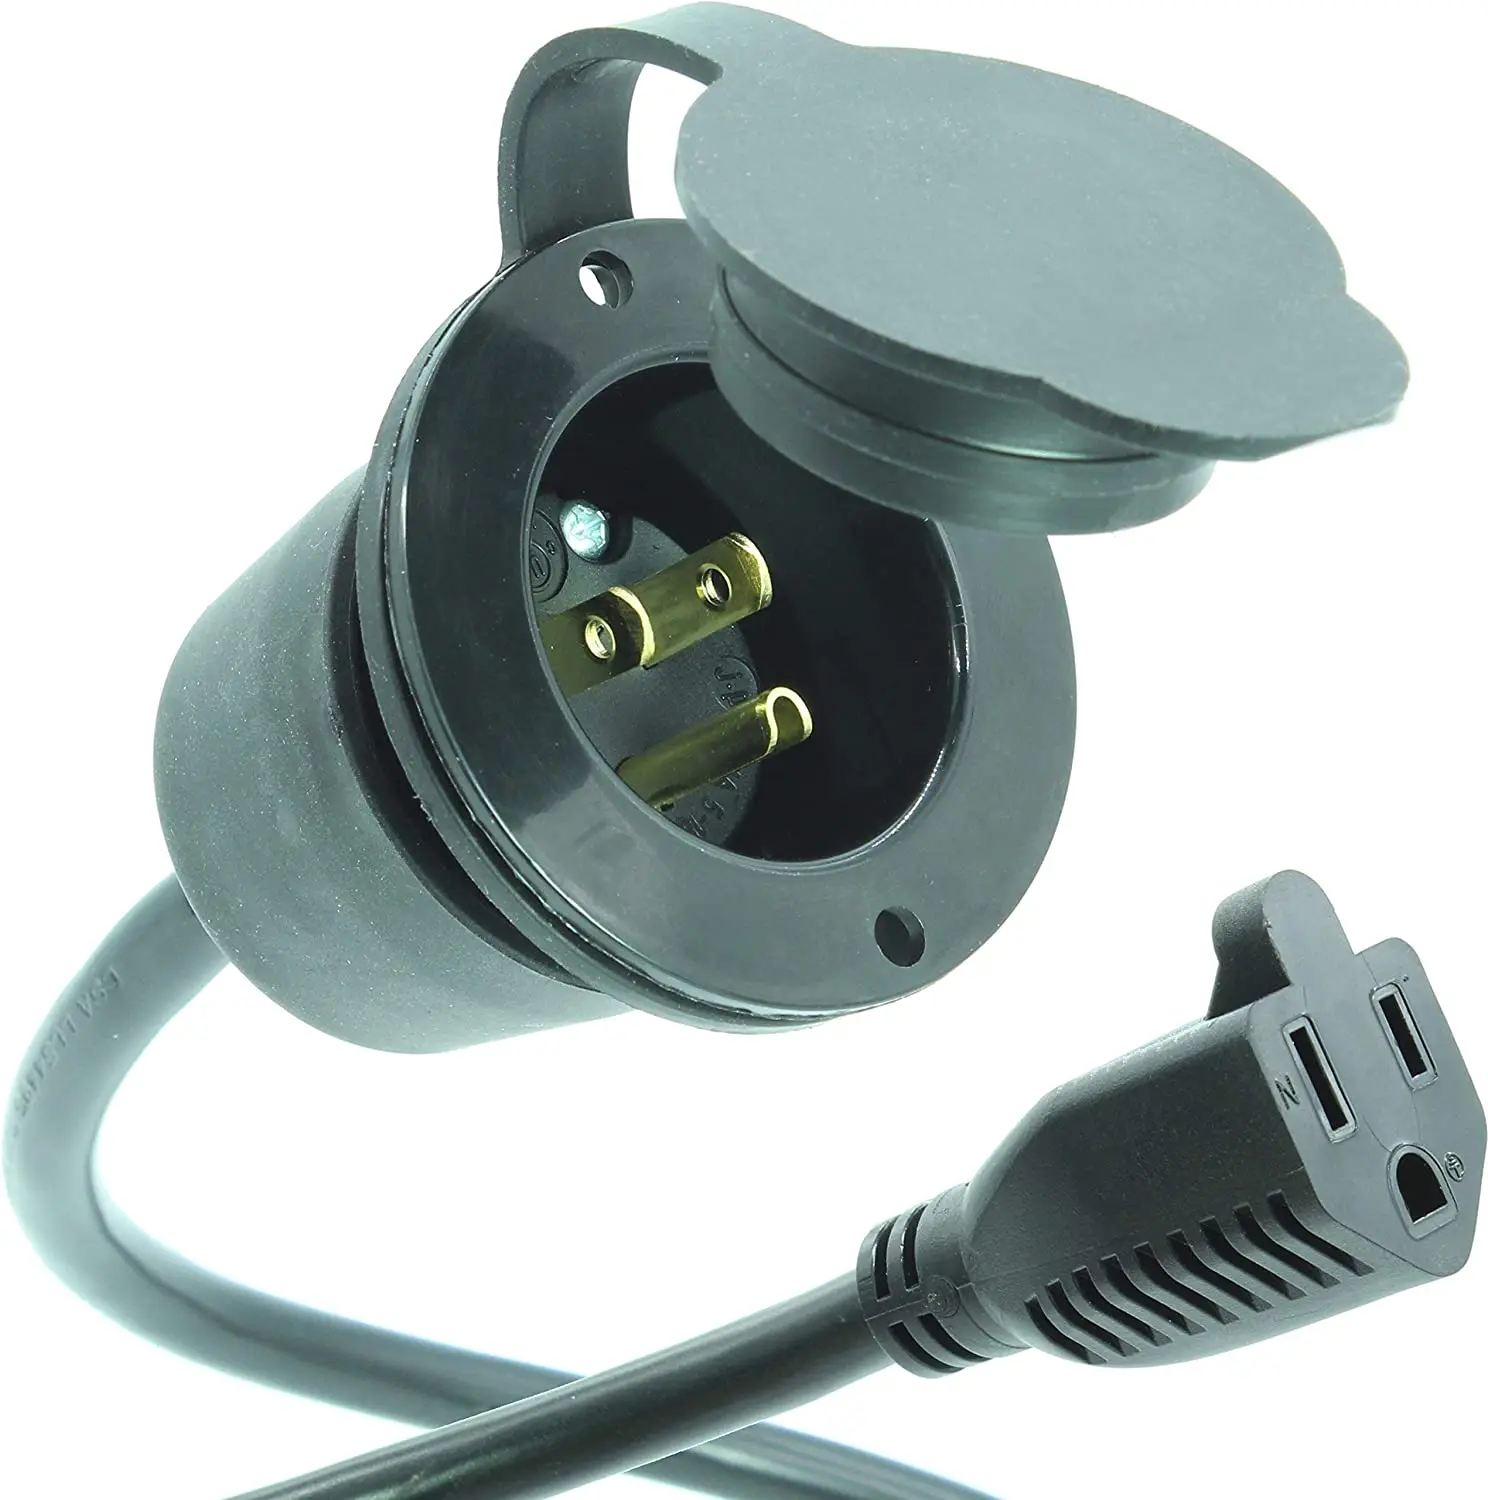 15A 125V NEMA 5-15 Flanged Inlet Power Plug with  Waterproof Extension Cord+ Waterproof Cover, UL Listed